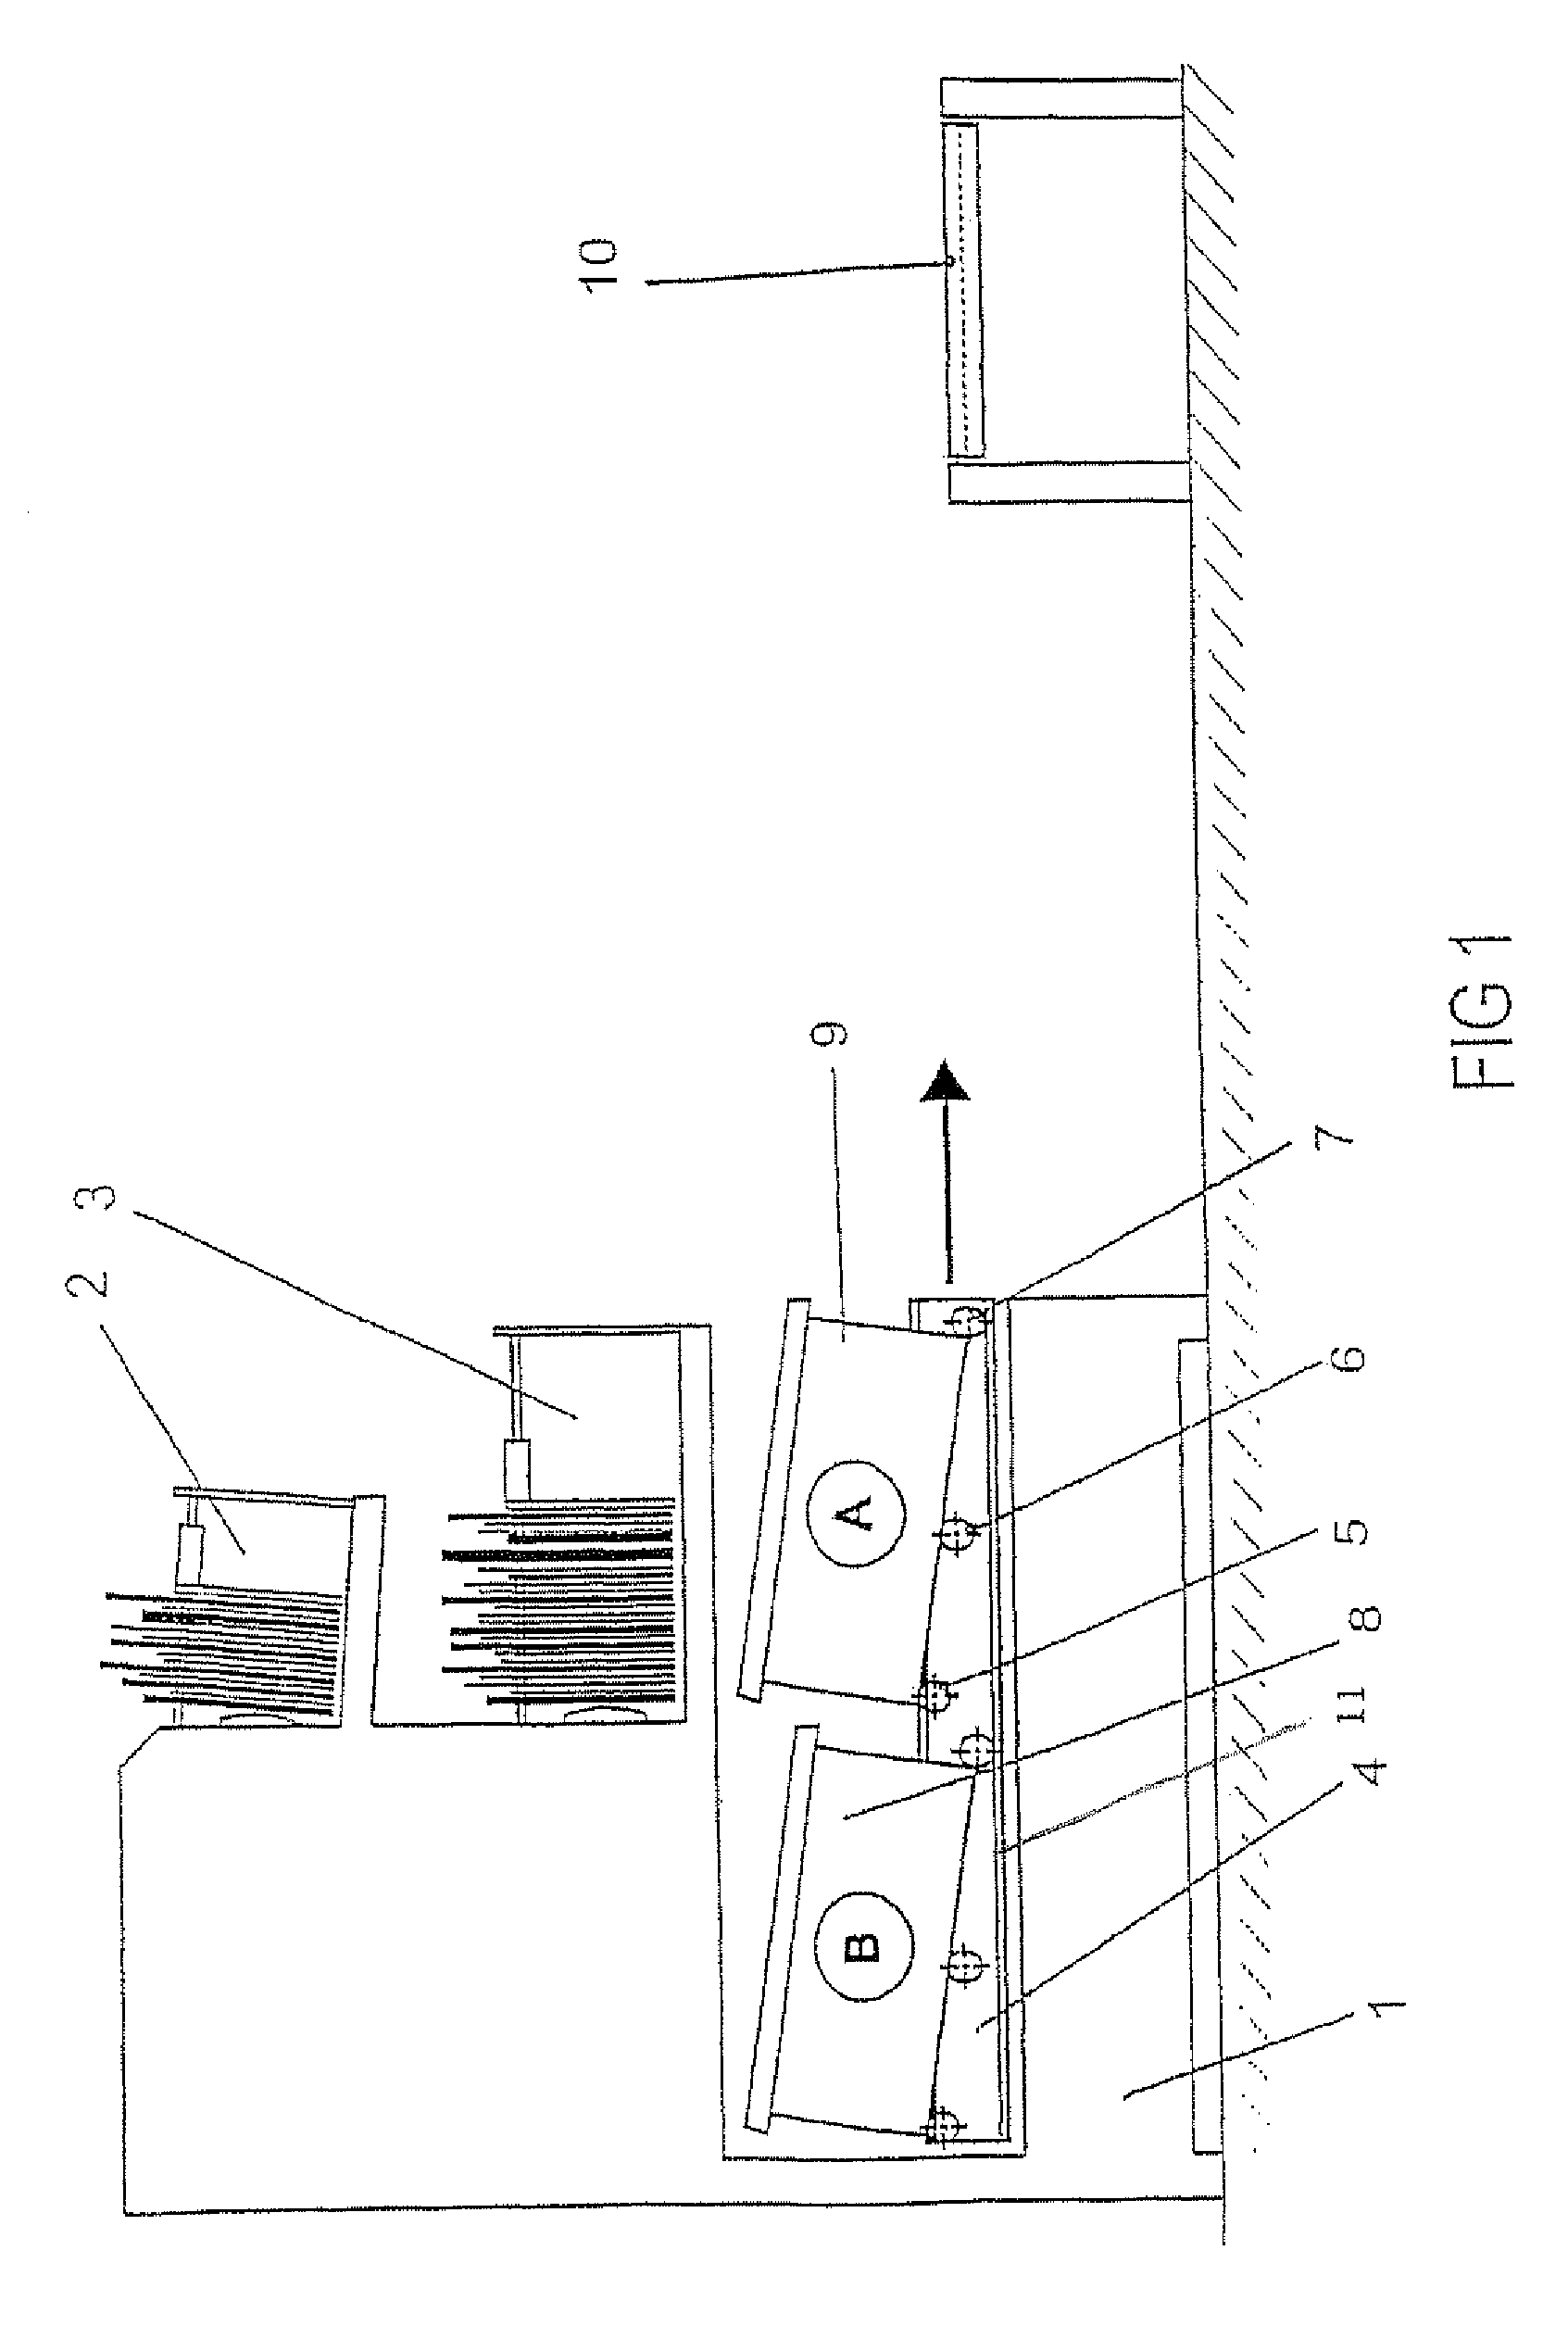 Device for filling and removing containers for sorted mail